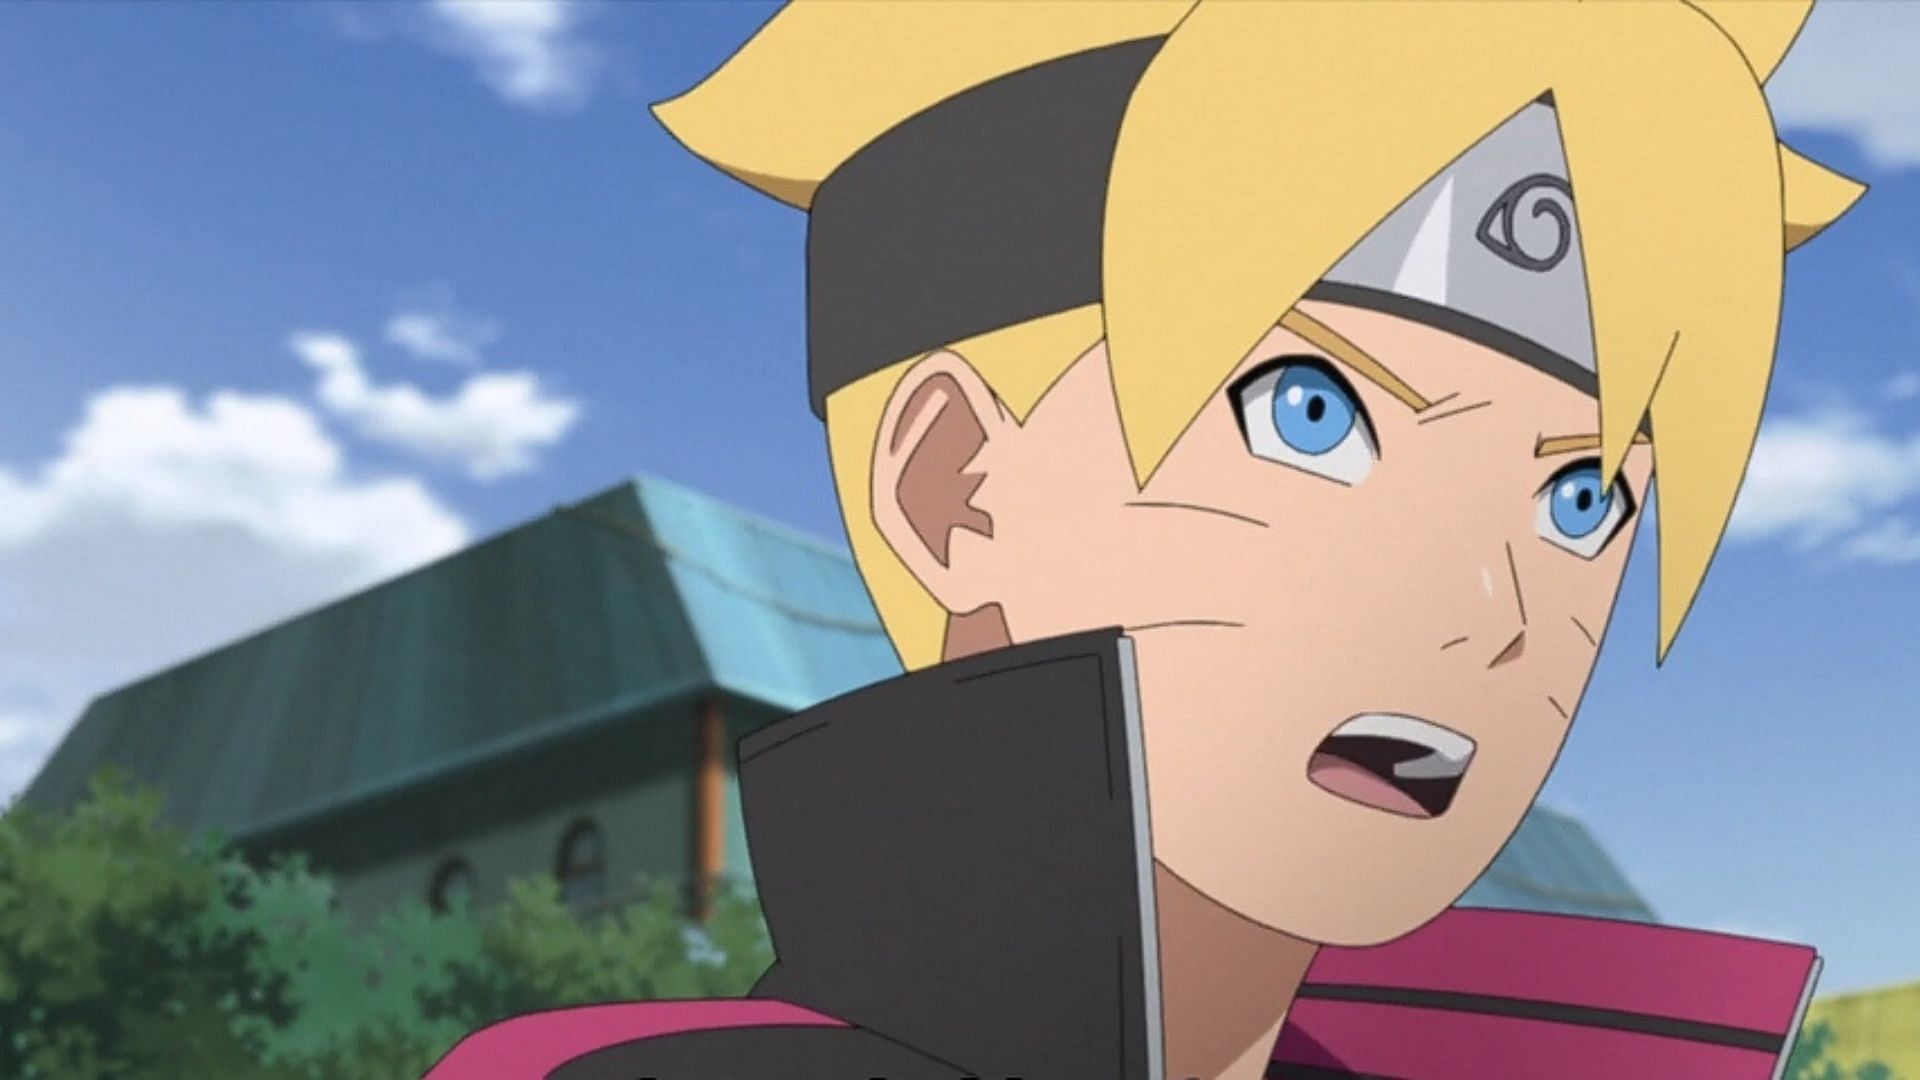 Major Boruto spoilers hint at the imminent death of major character